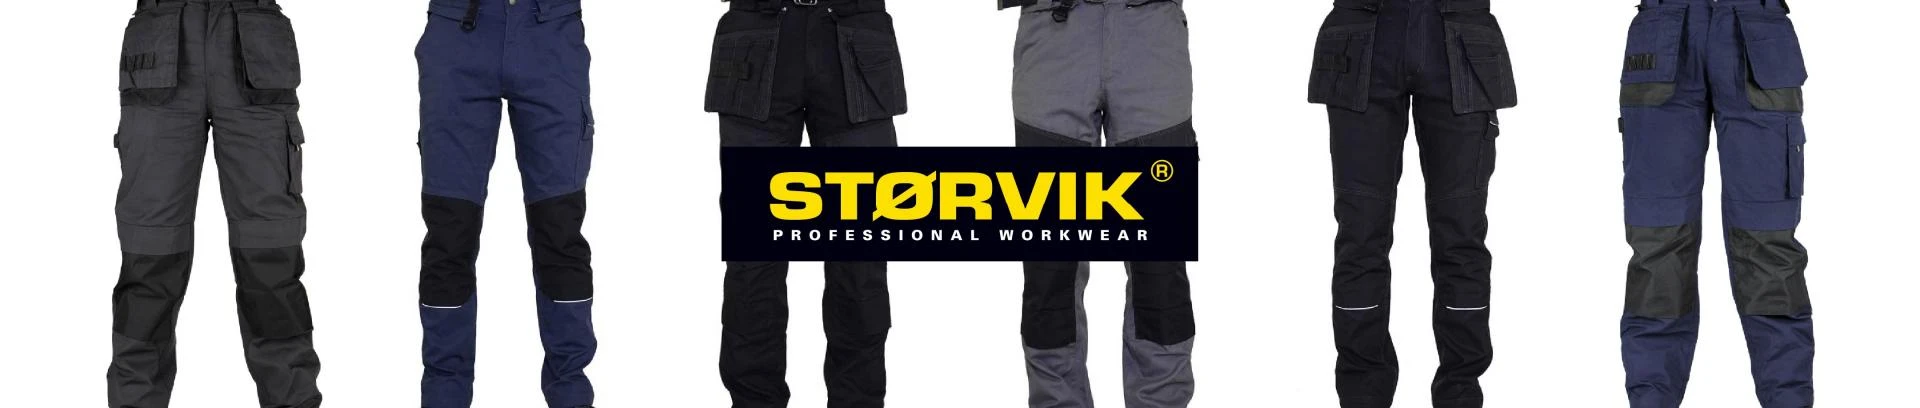 Work trousers